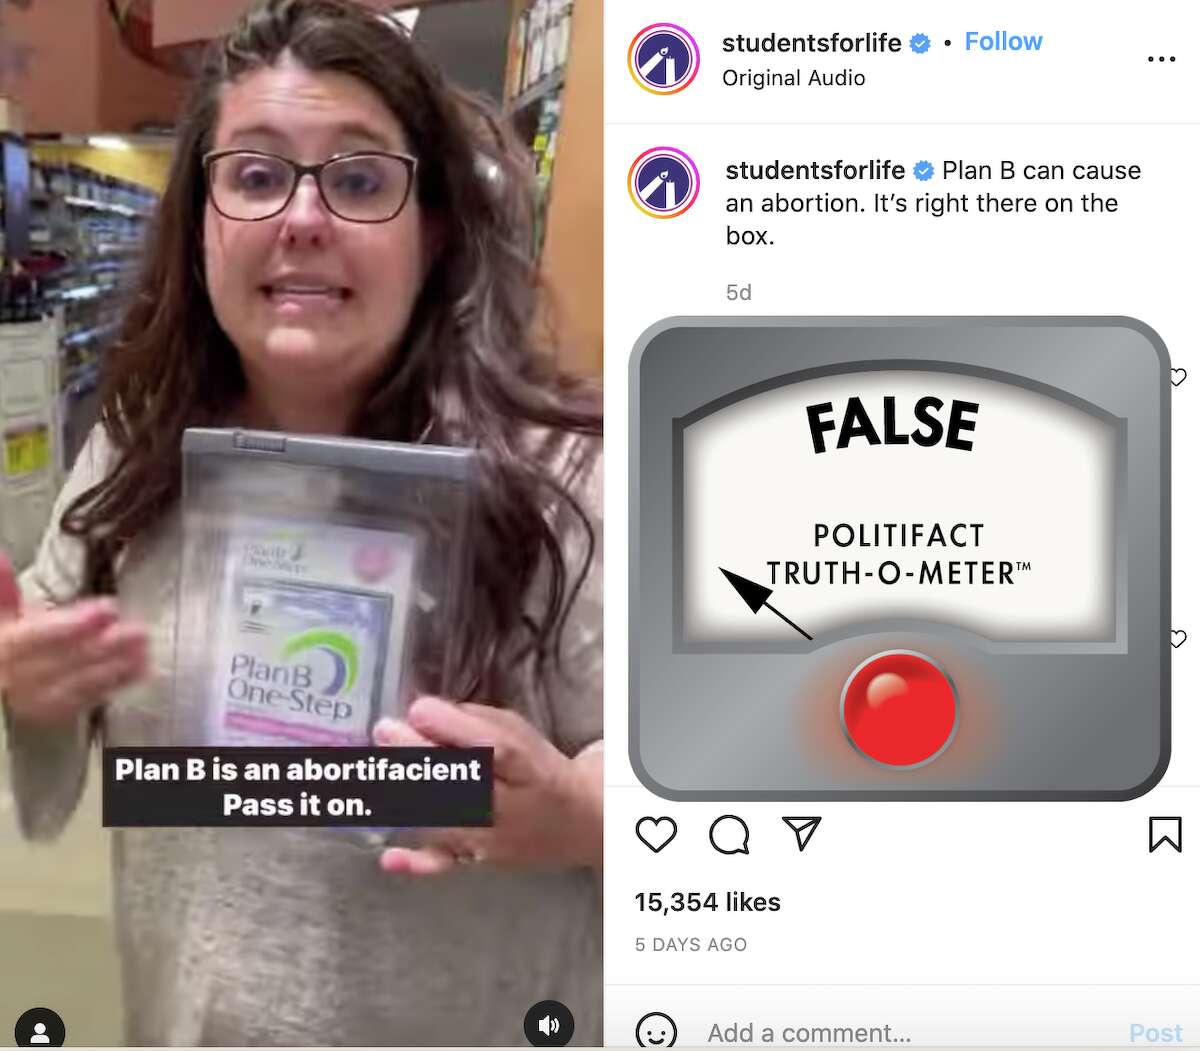 Anti-abortion college group Students for Life posted a video falsely saying that "Plan B can cause an abortion."